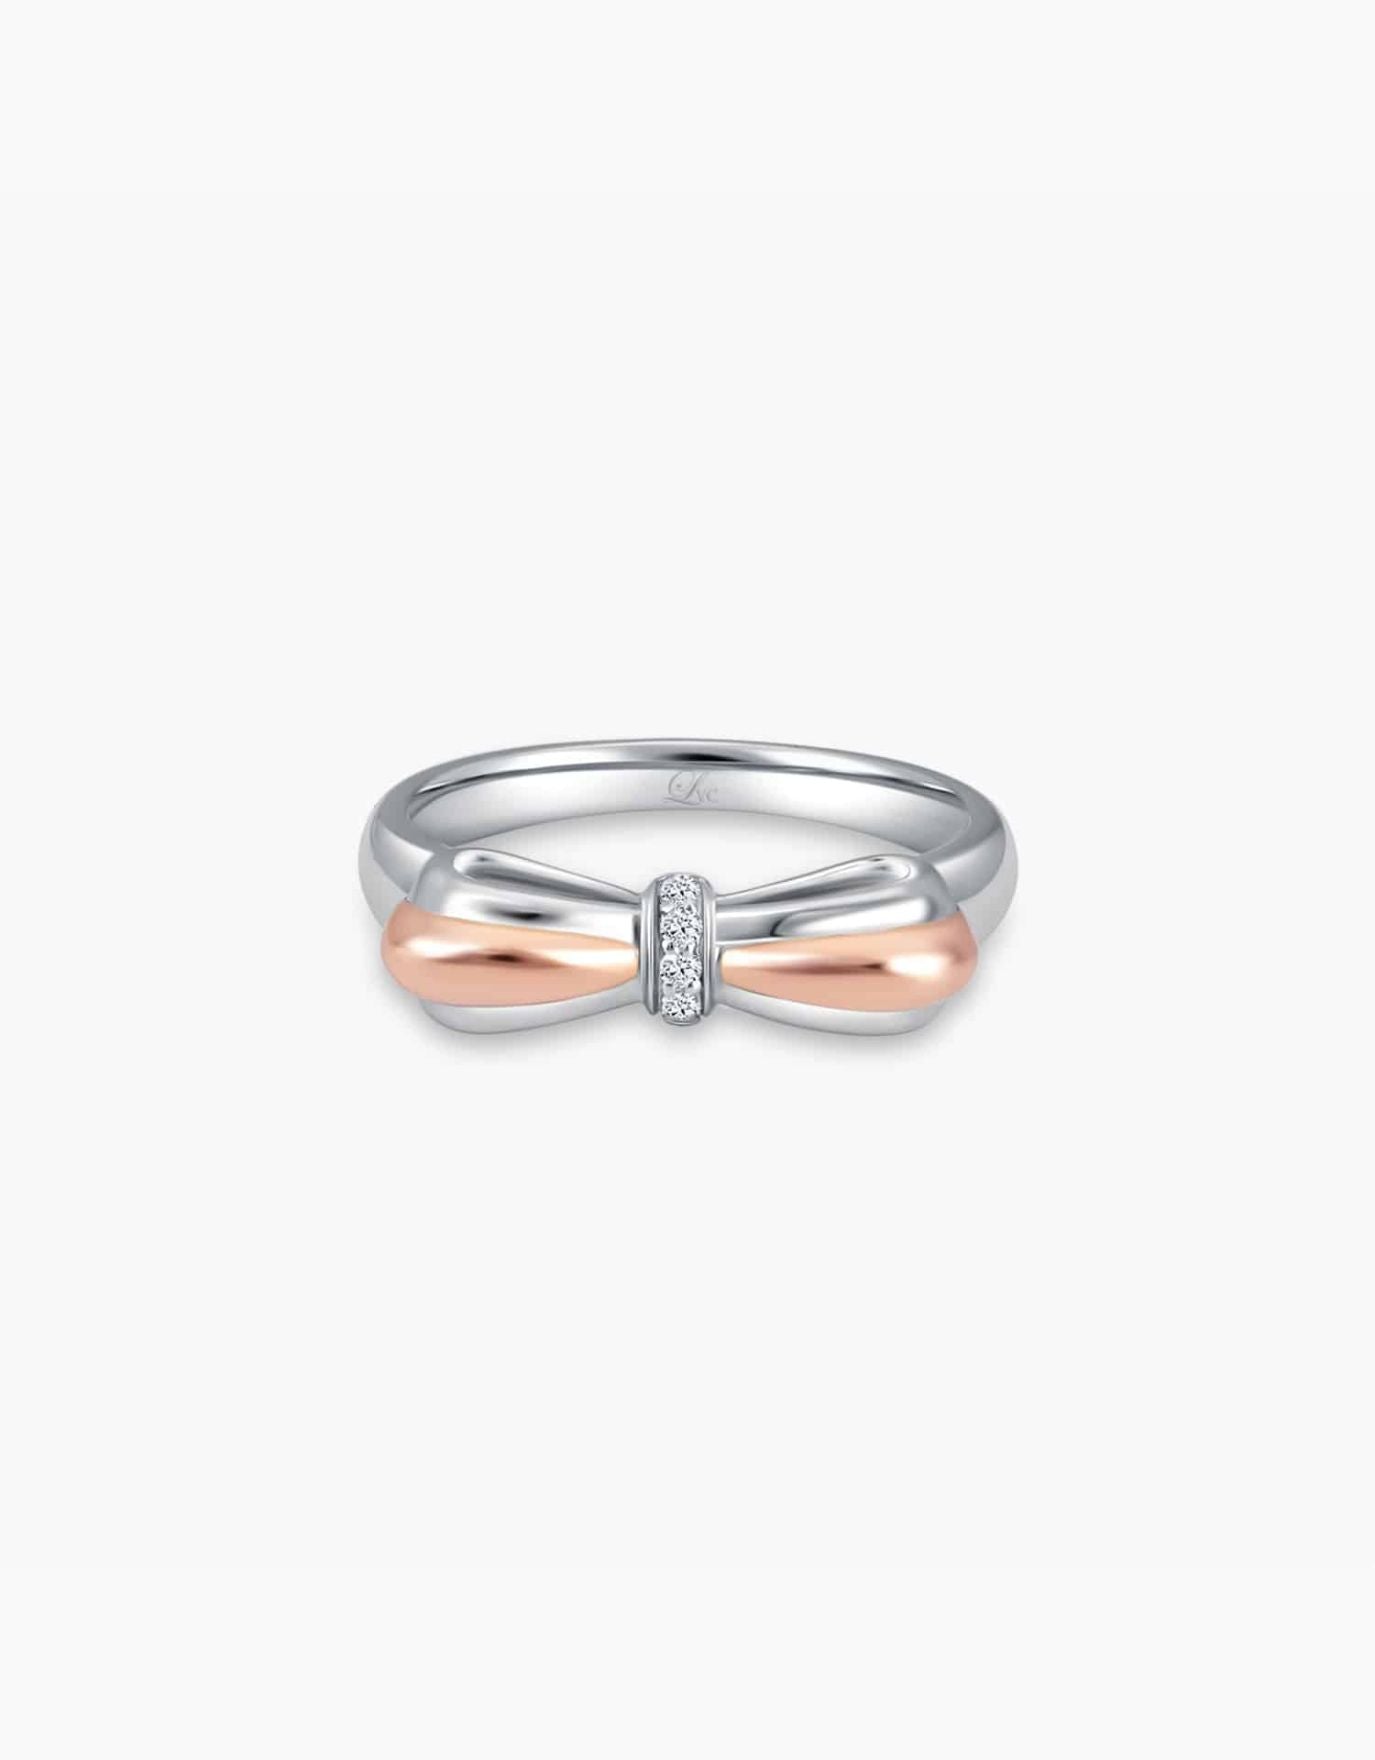 LVC Noeud Bond Ring with Rose Gold Bow and Diamond Encrusted Knot